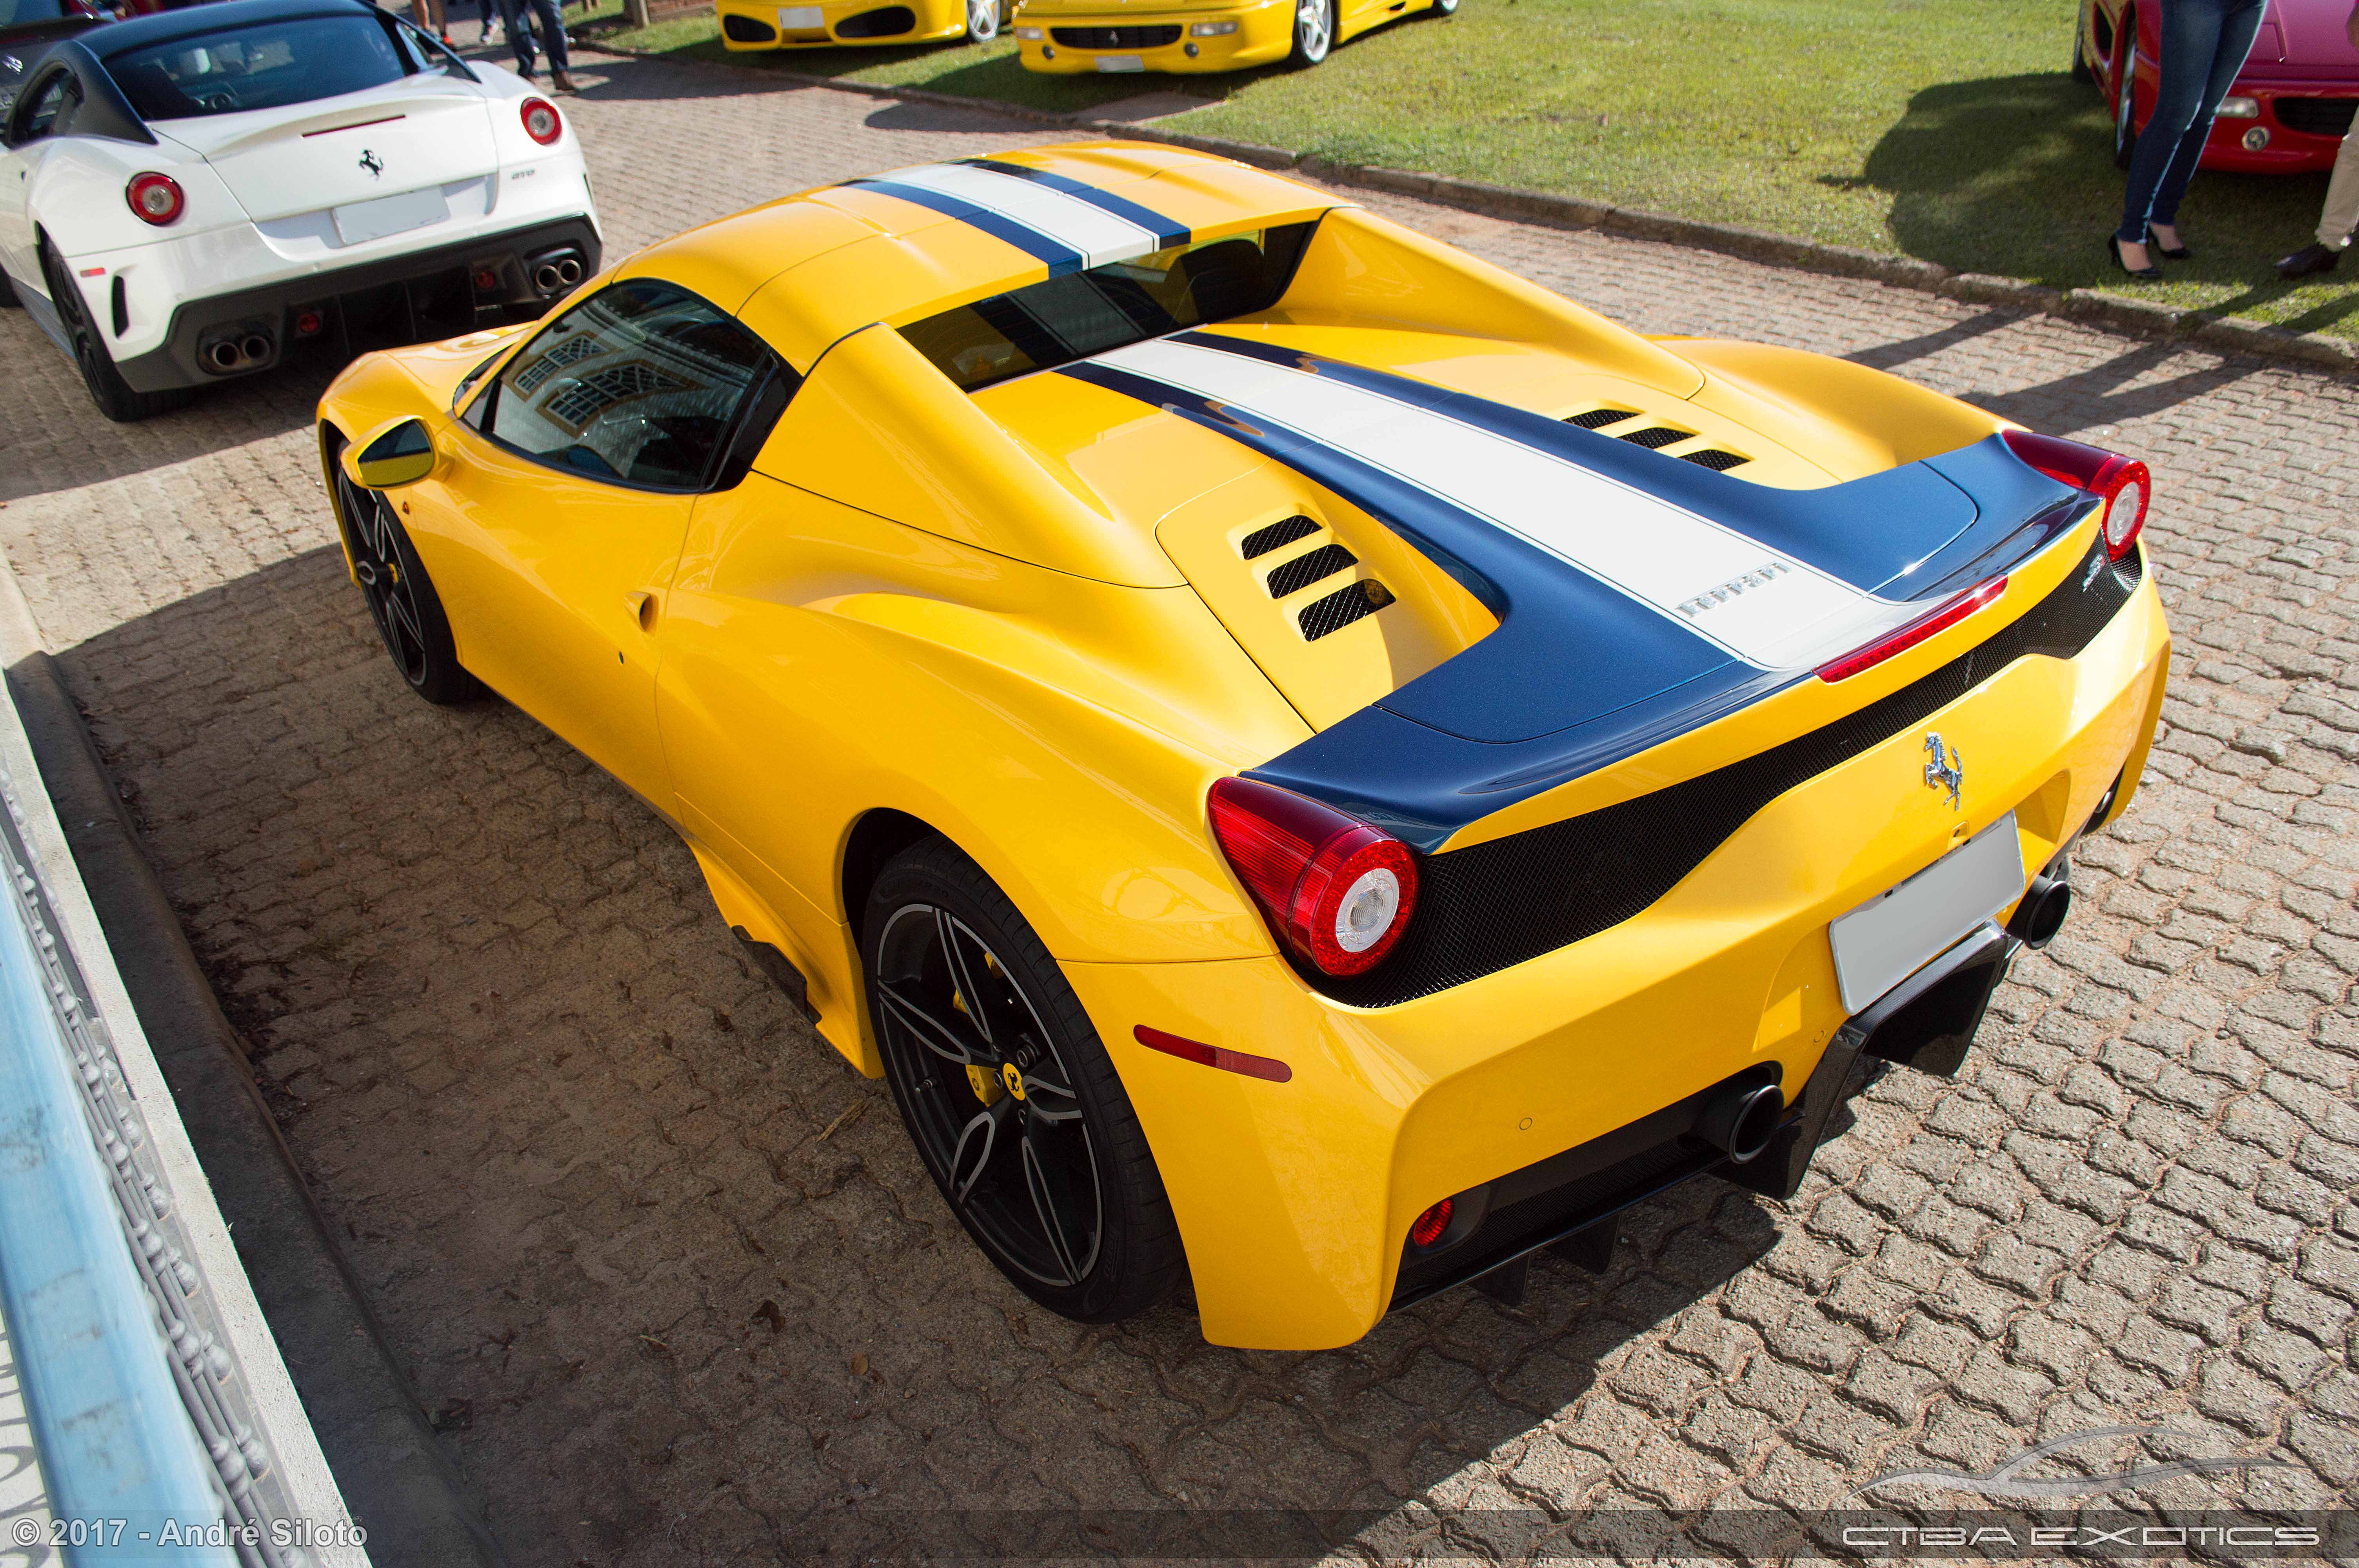 Speciale 5